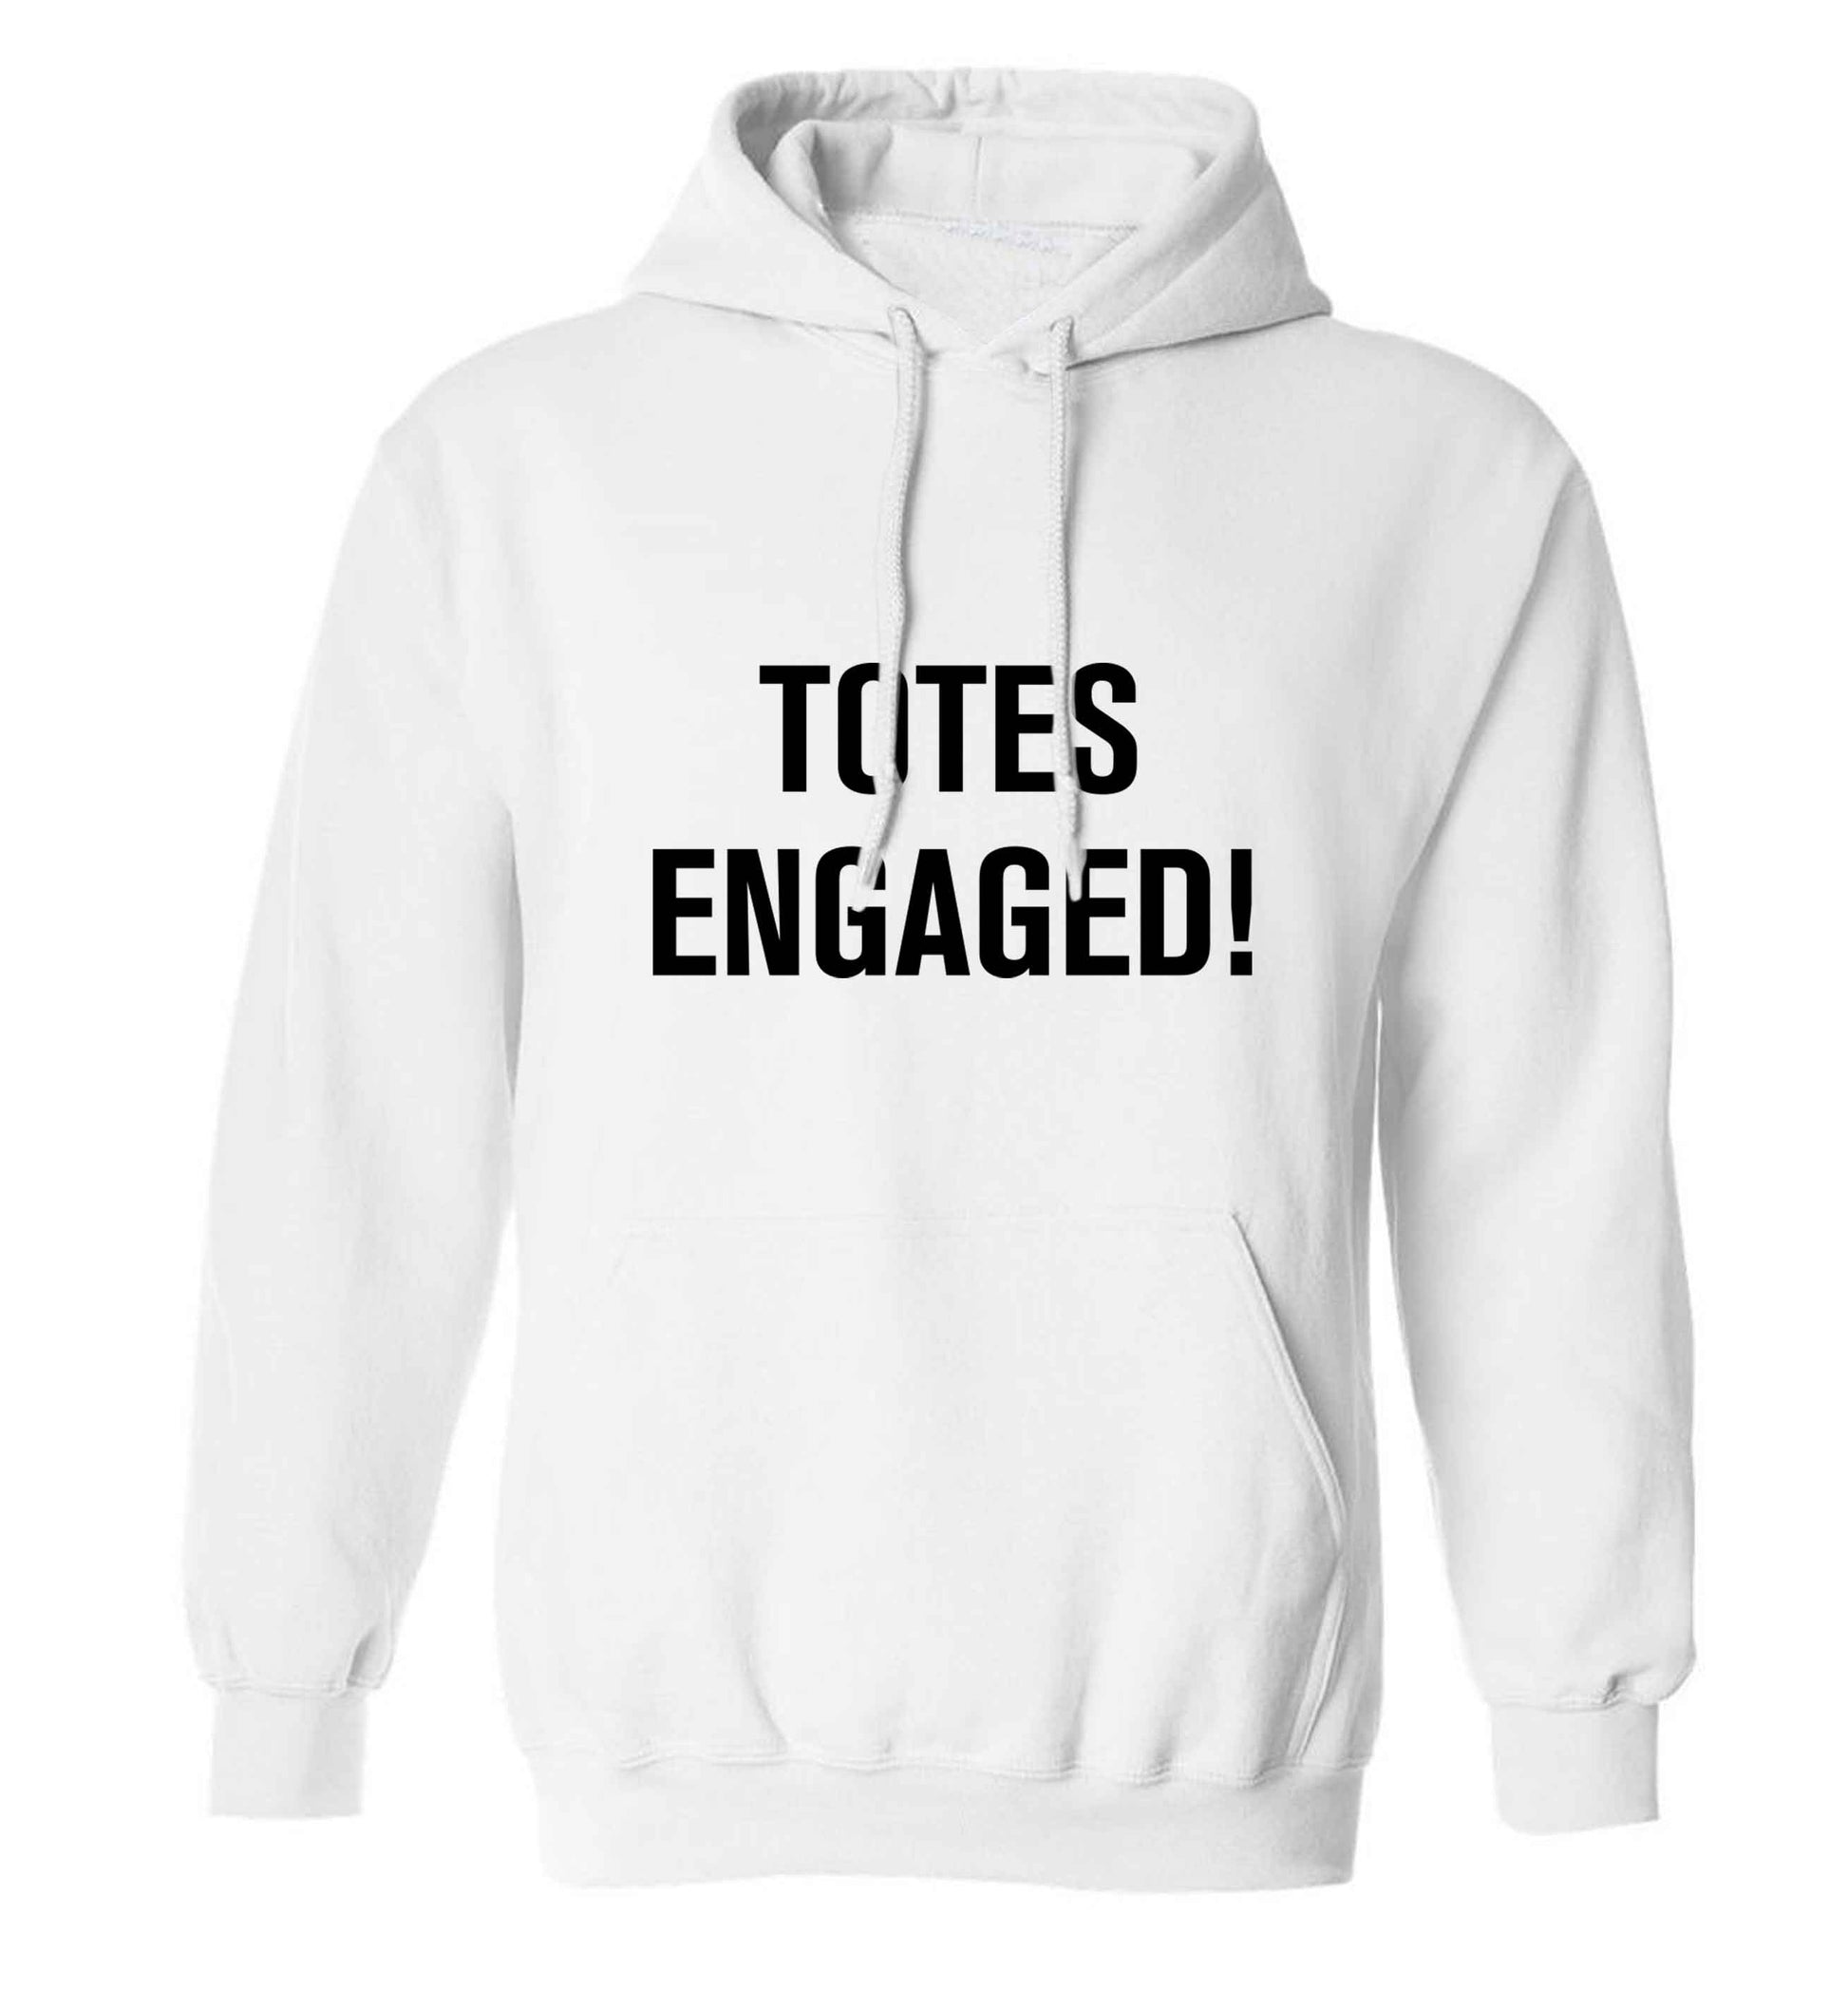 Totes engaged adults unisex white hoodie 2XL